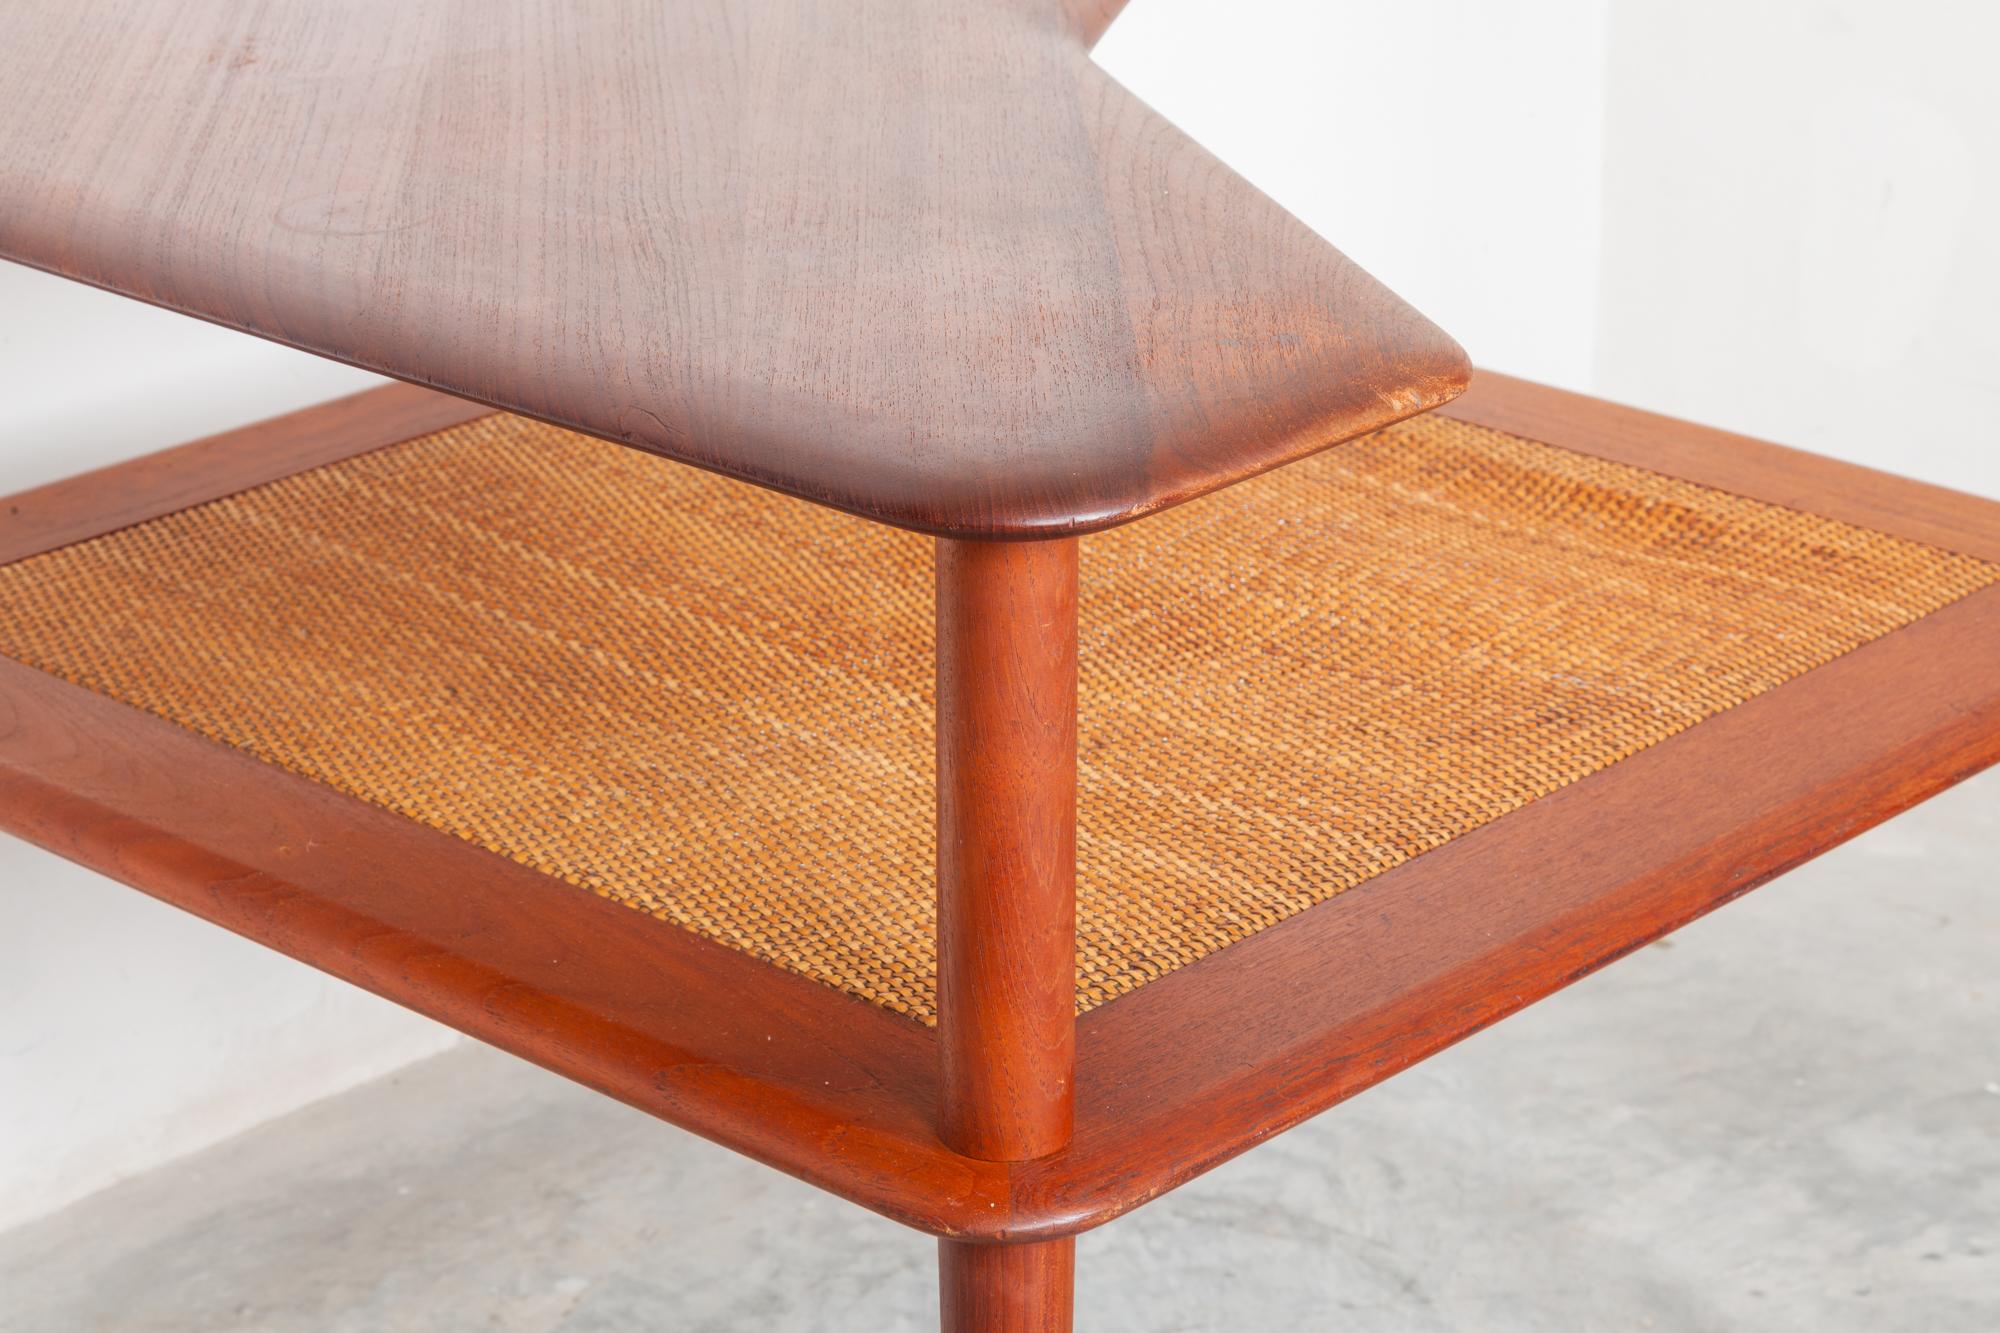 Hand-Crafted Coffee Corner Table in Teak and Cane by Peter Hvidt, Denmark, 1955 For Sale